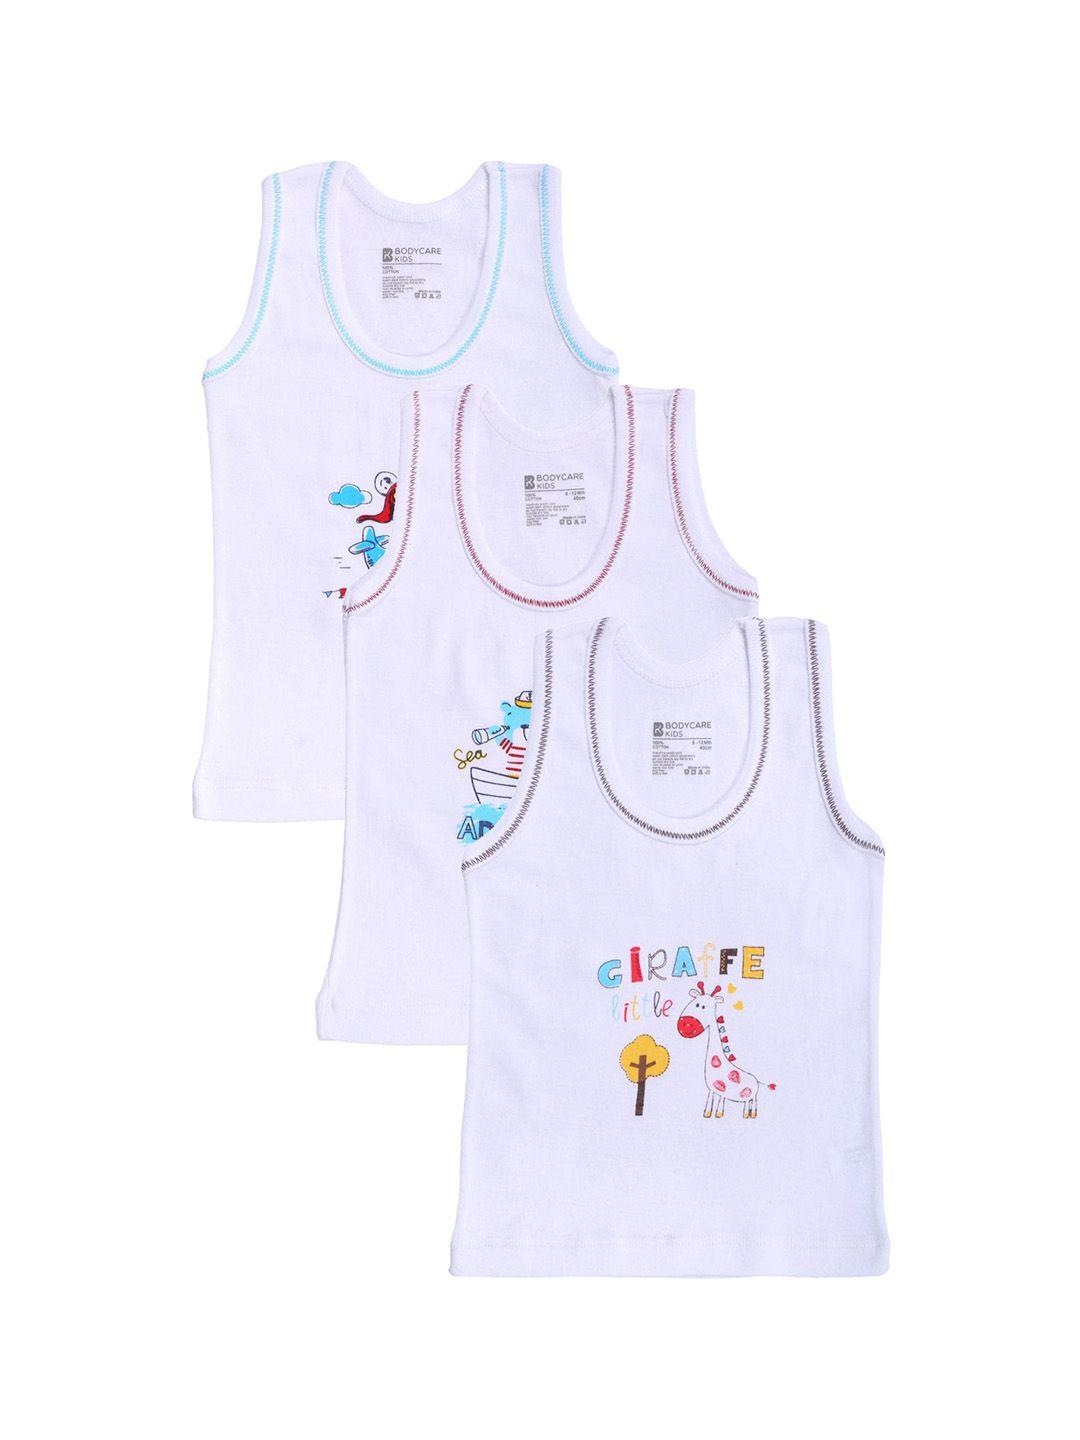 Bodycare Kids Infant Boys Pack Of 3 Printed Cotton Innerwear Vests